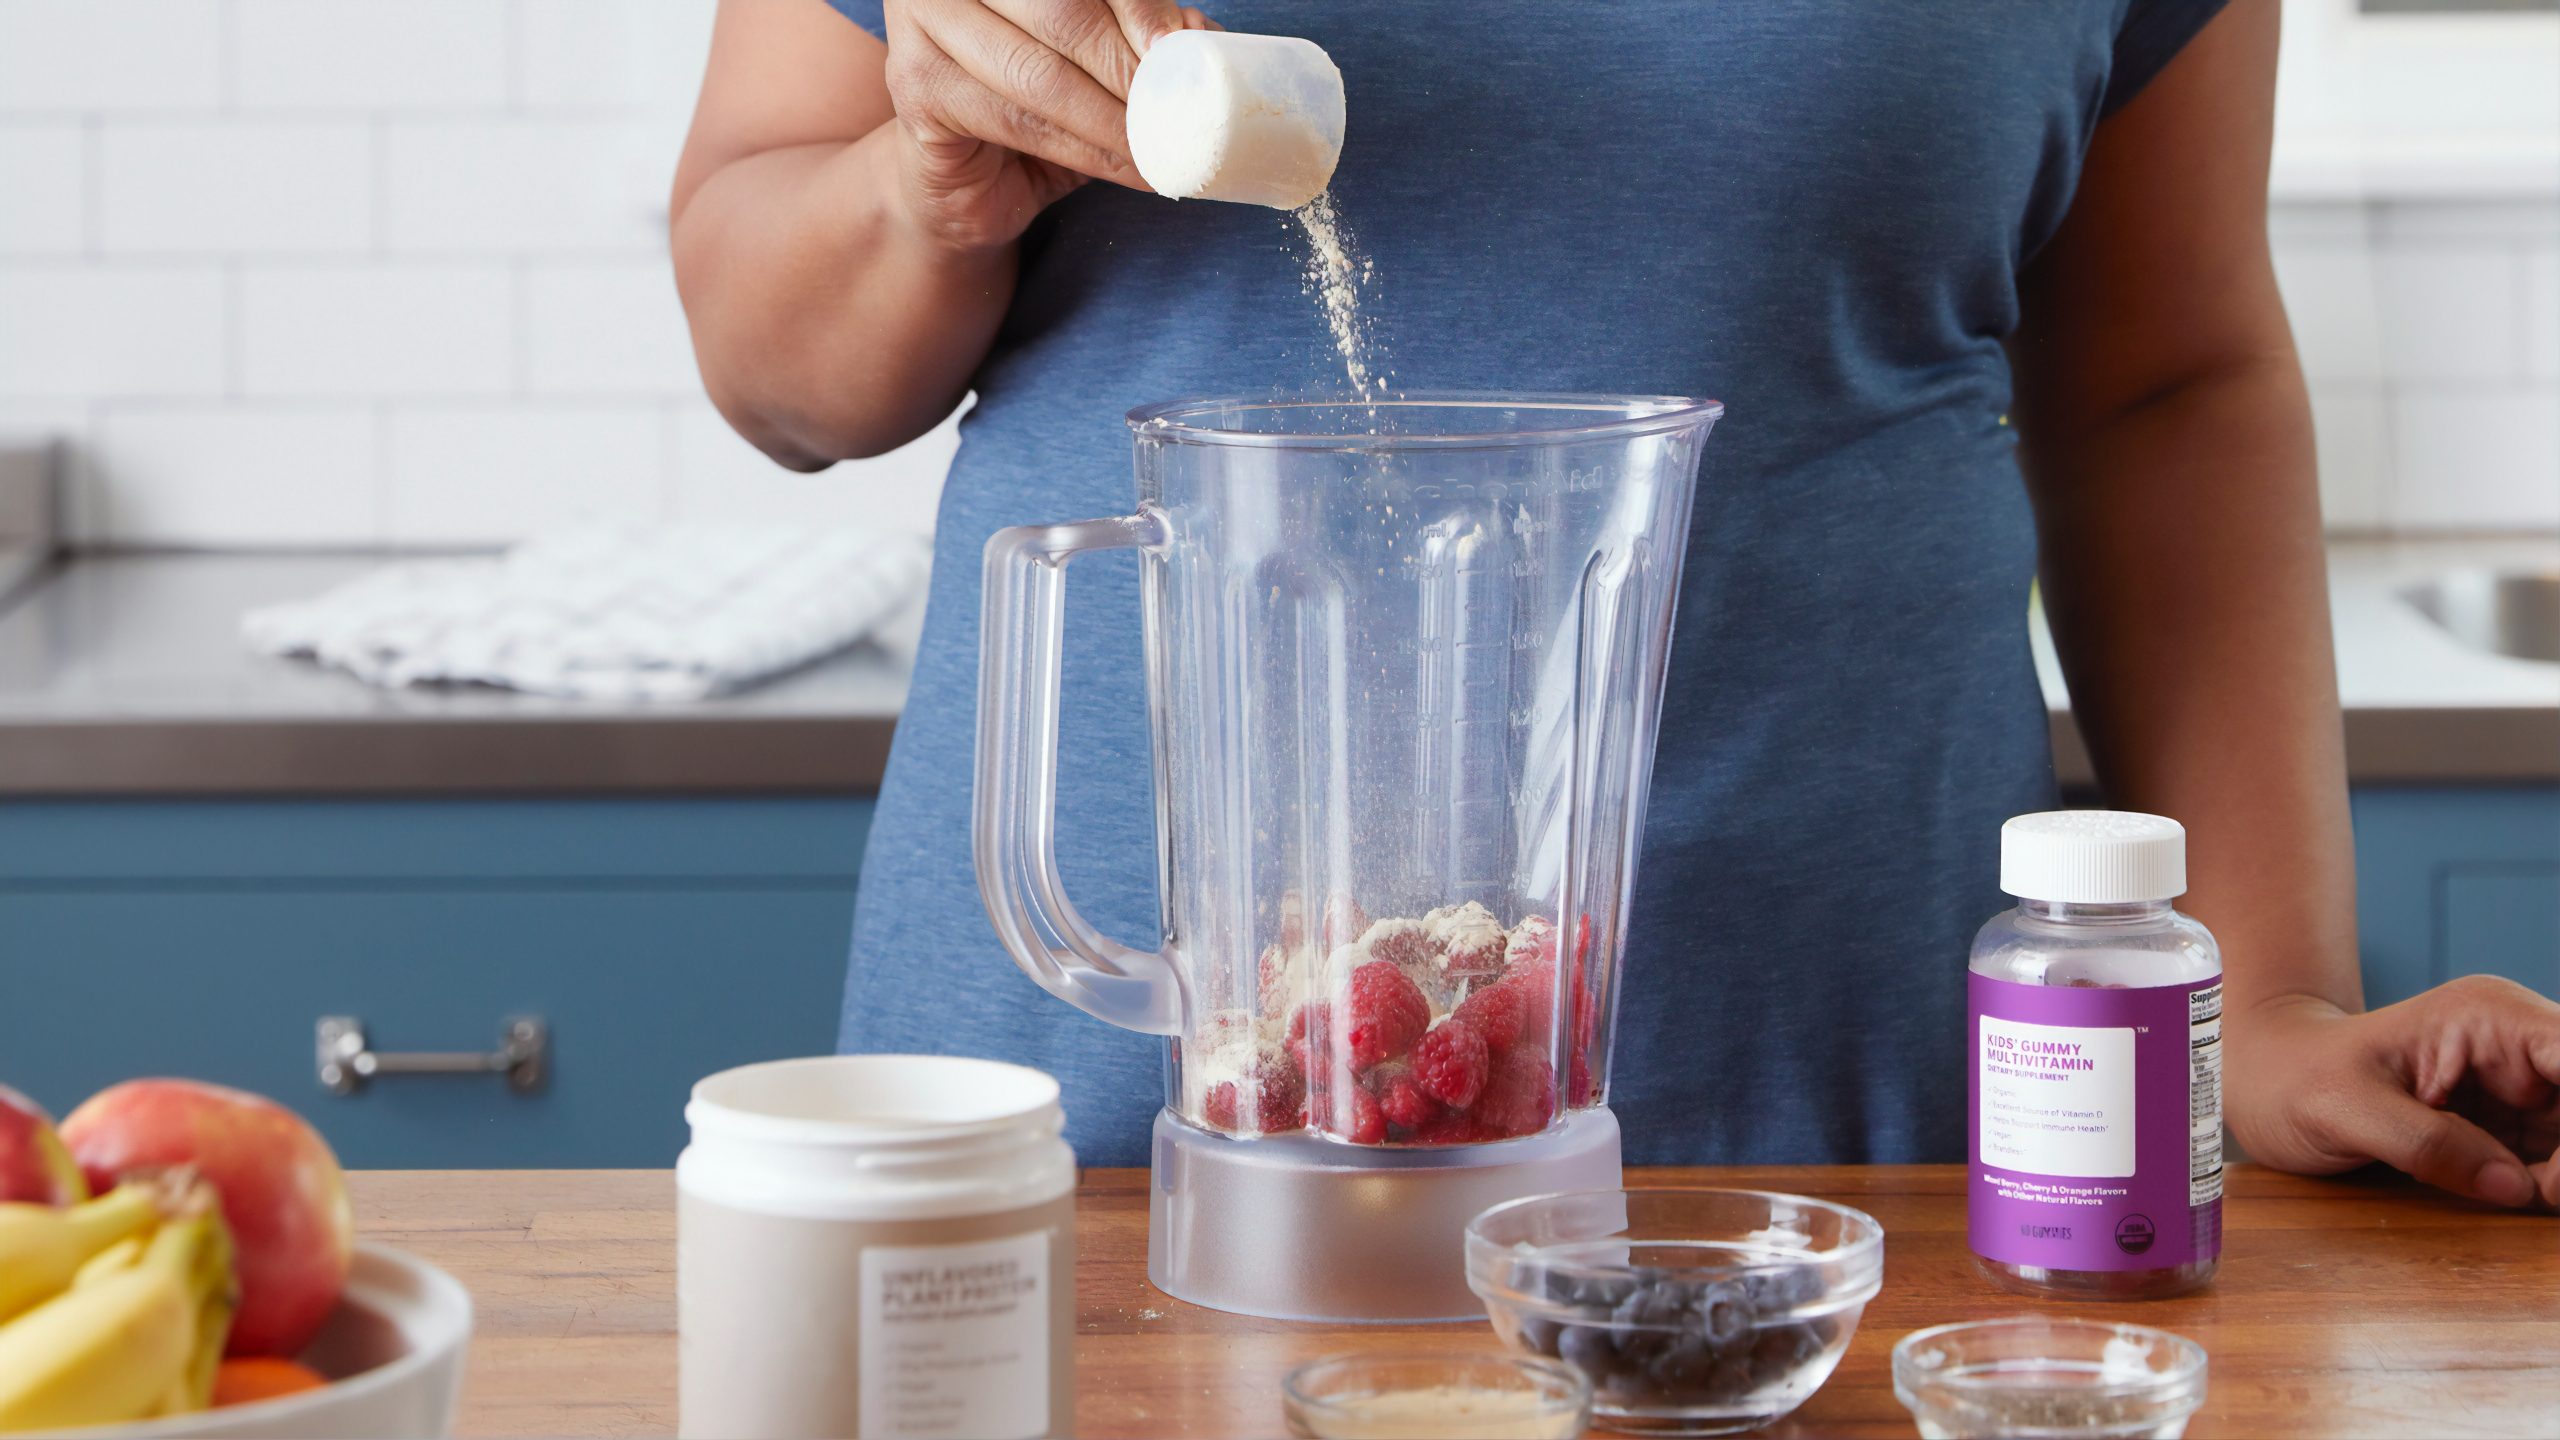 Can Protein Shakes Assist in Weight Loss?